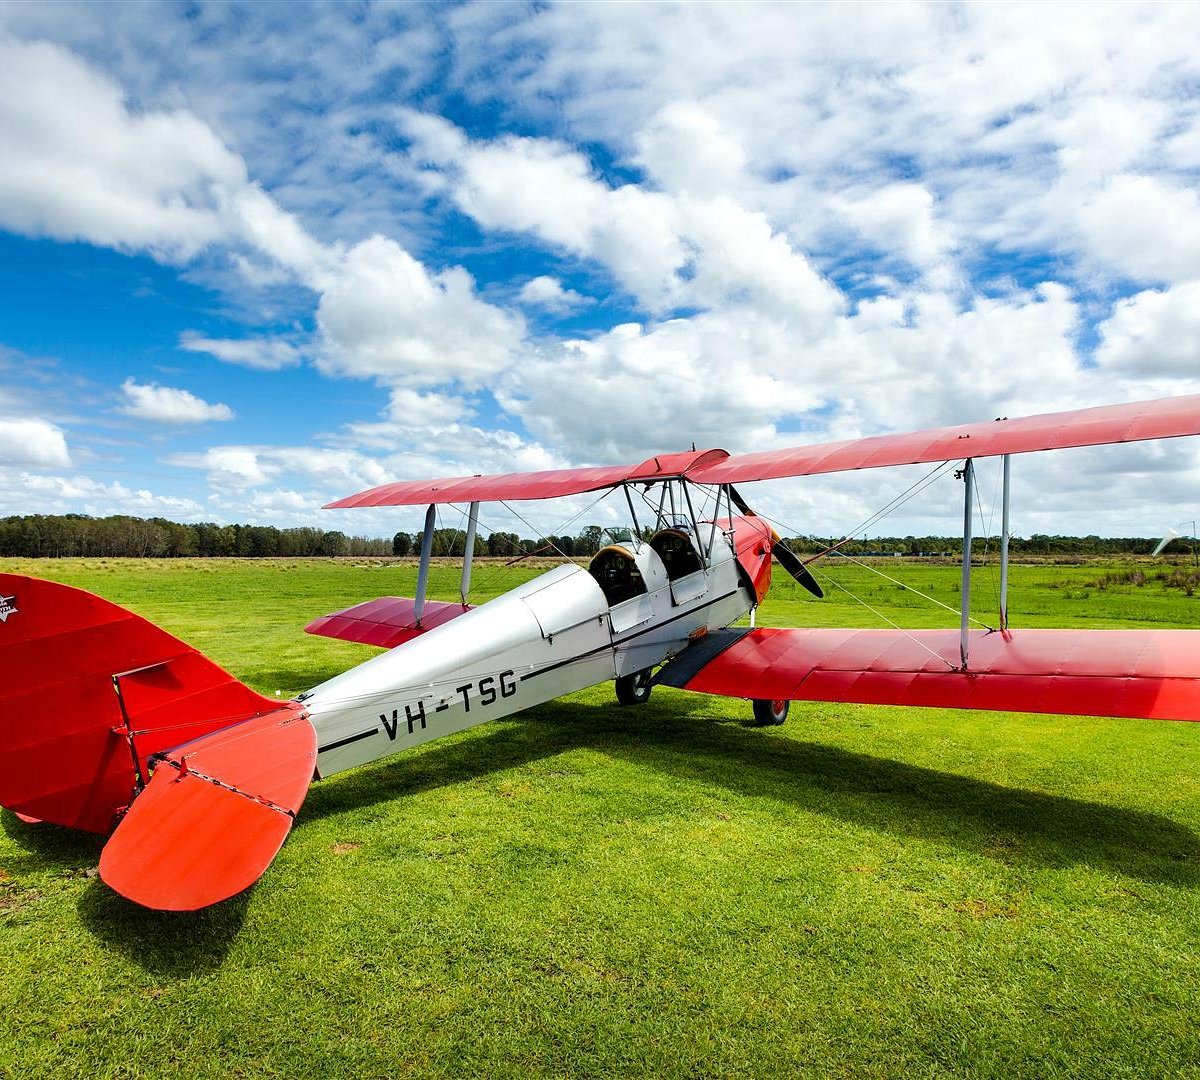 Tiger Moth Joy Rides Pimpama All You Need To Know Before You Go